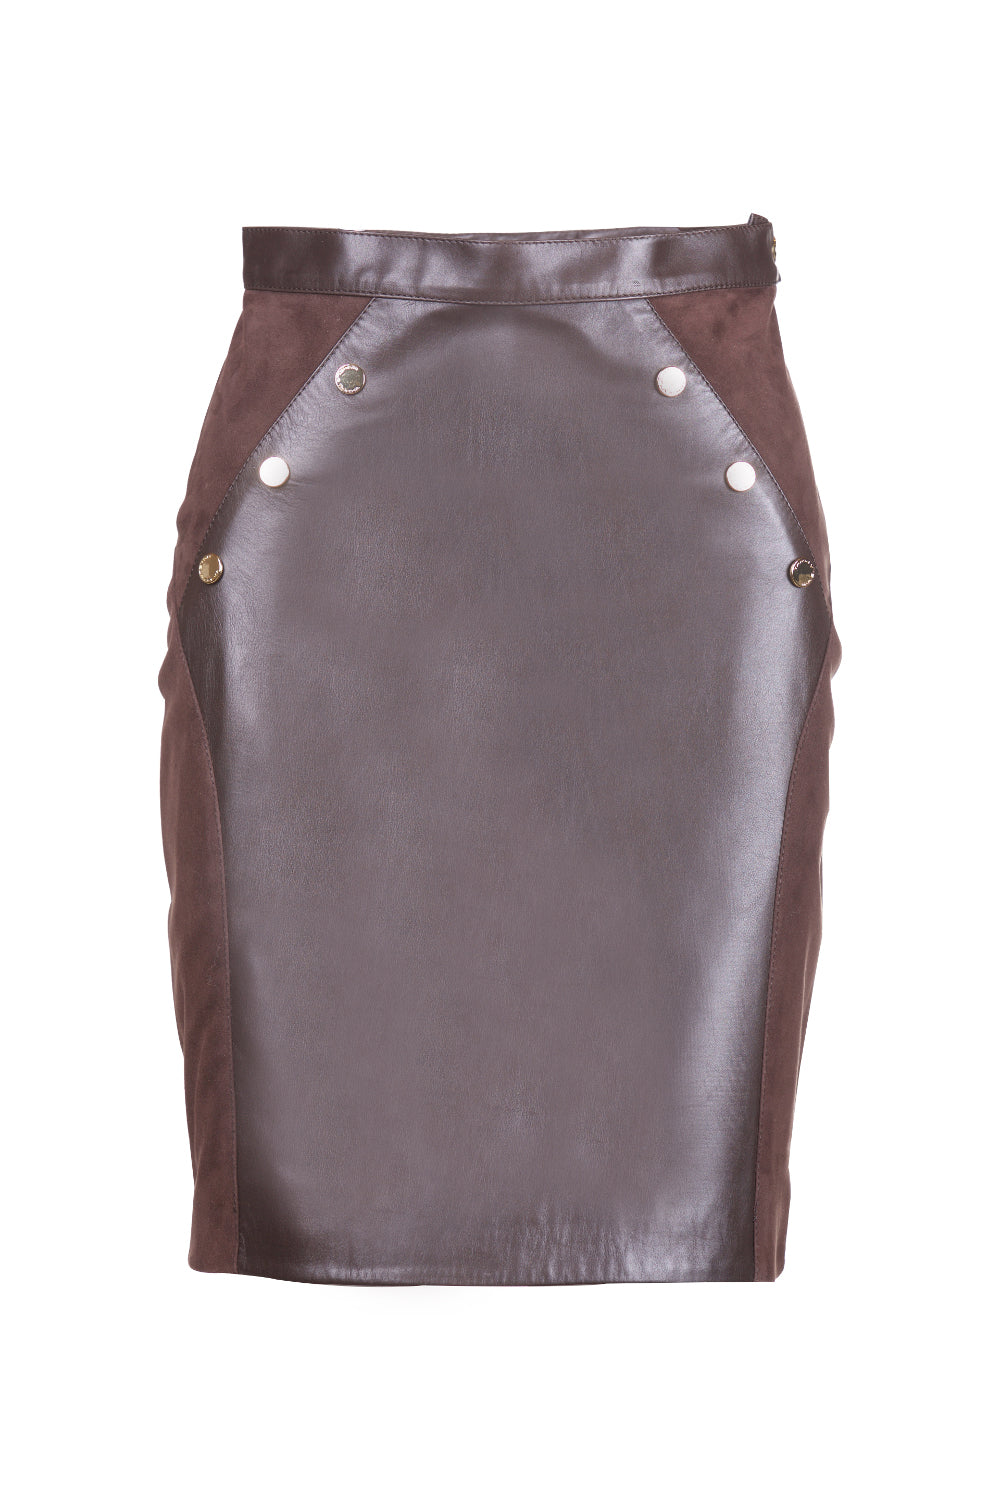 Suede Tailored Reindeer Leather Skirt- Limited Edition